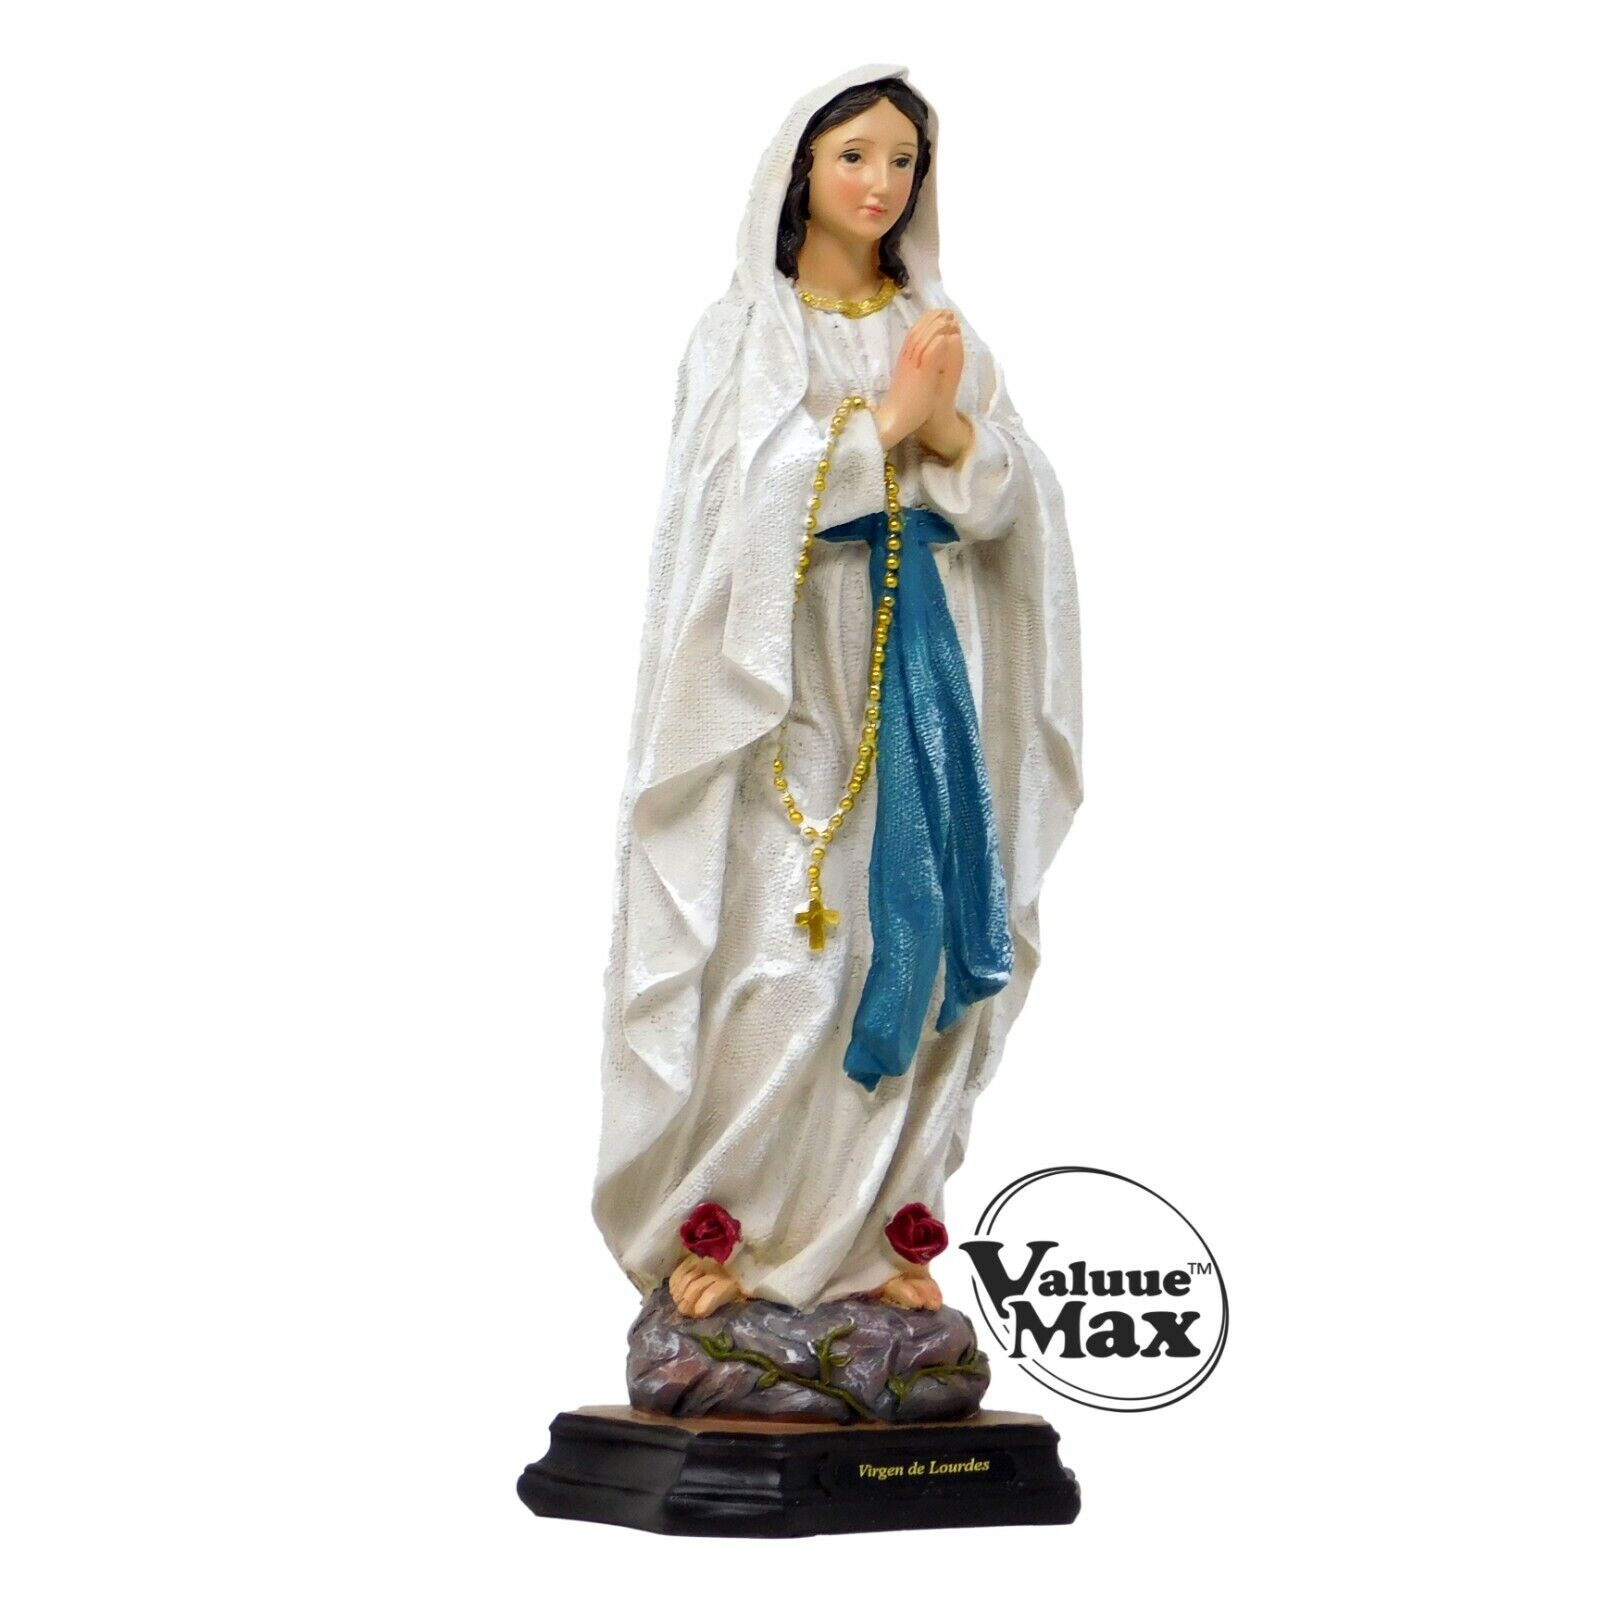 ValuueMax™ Our Lady of Lourdes Statue, Finely Detailed Resin, 12 Inch Tall